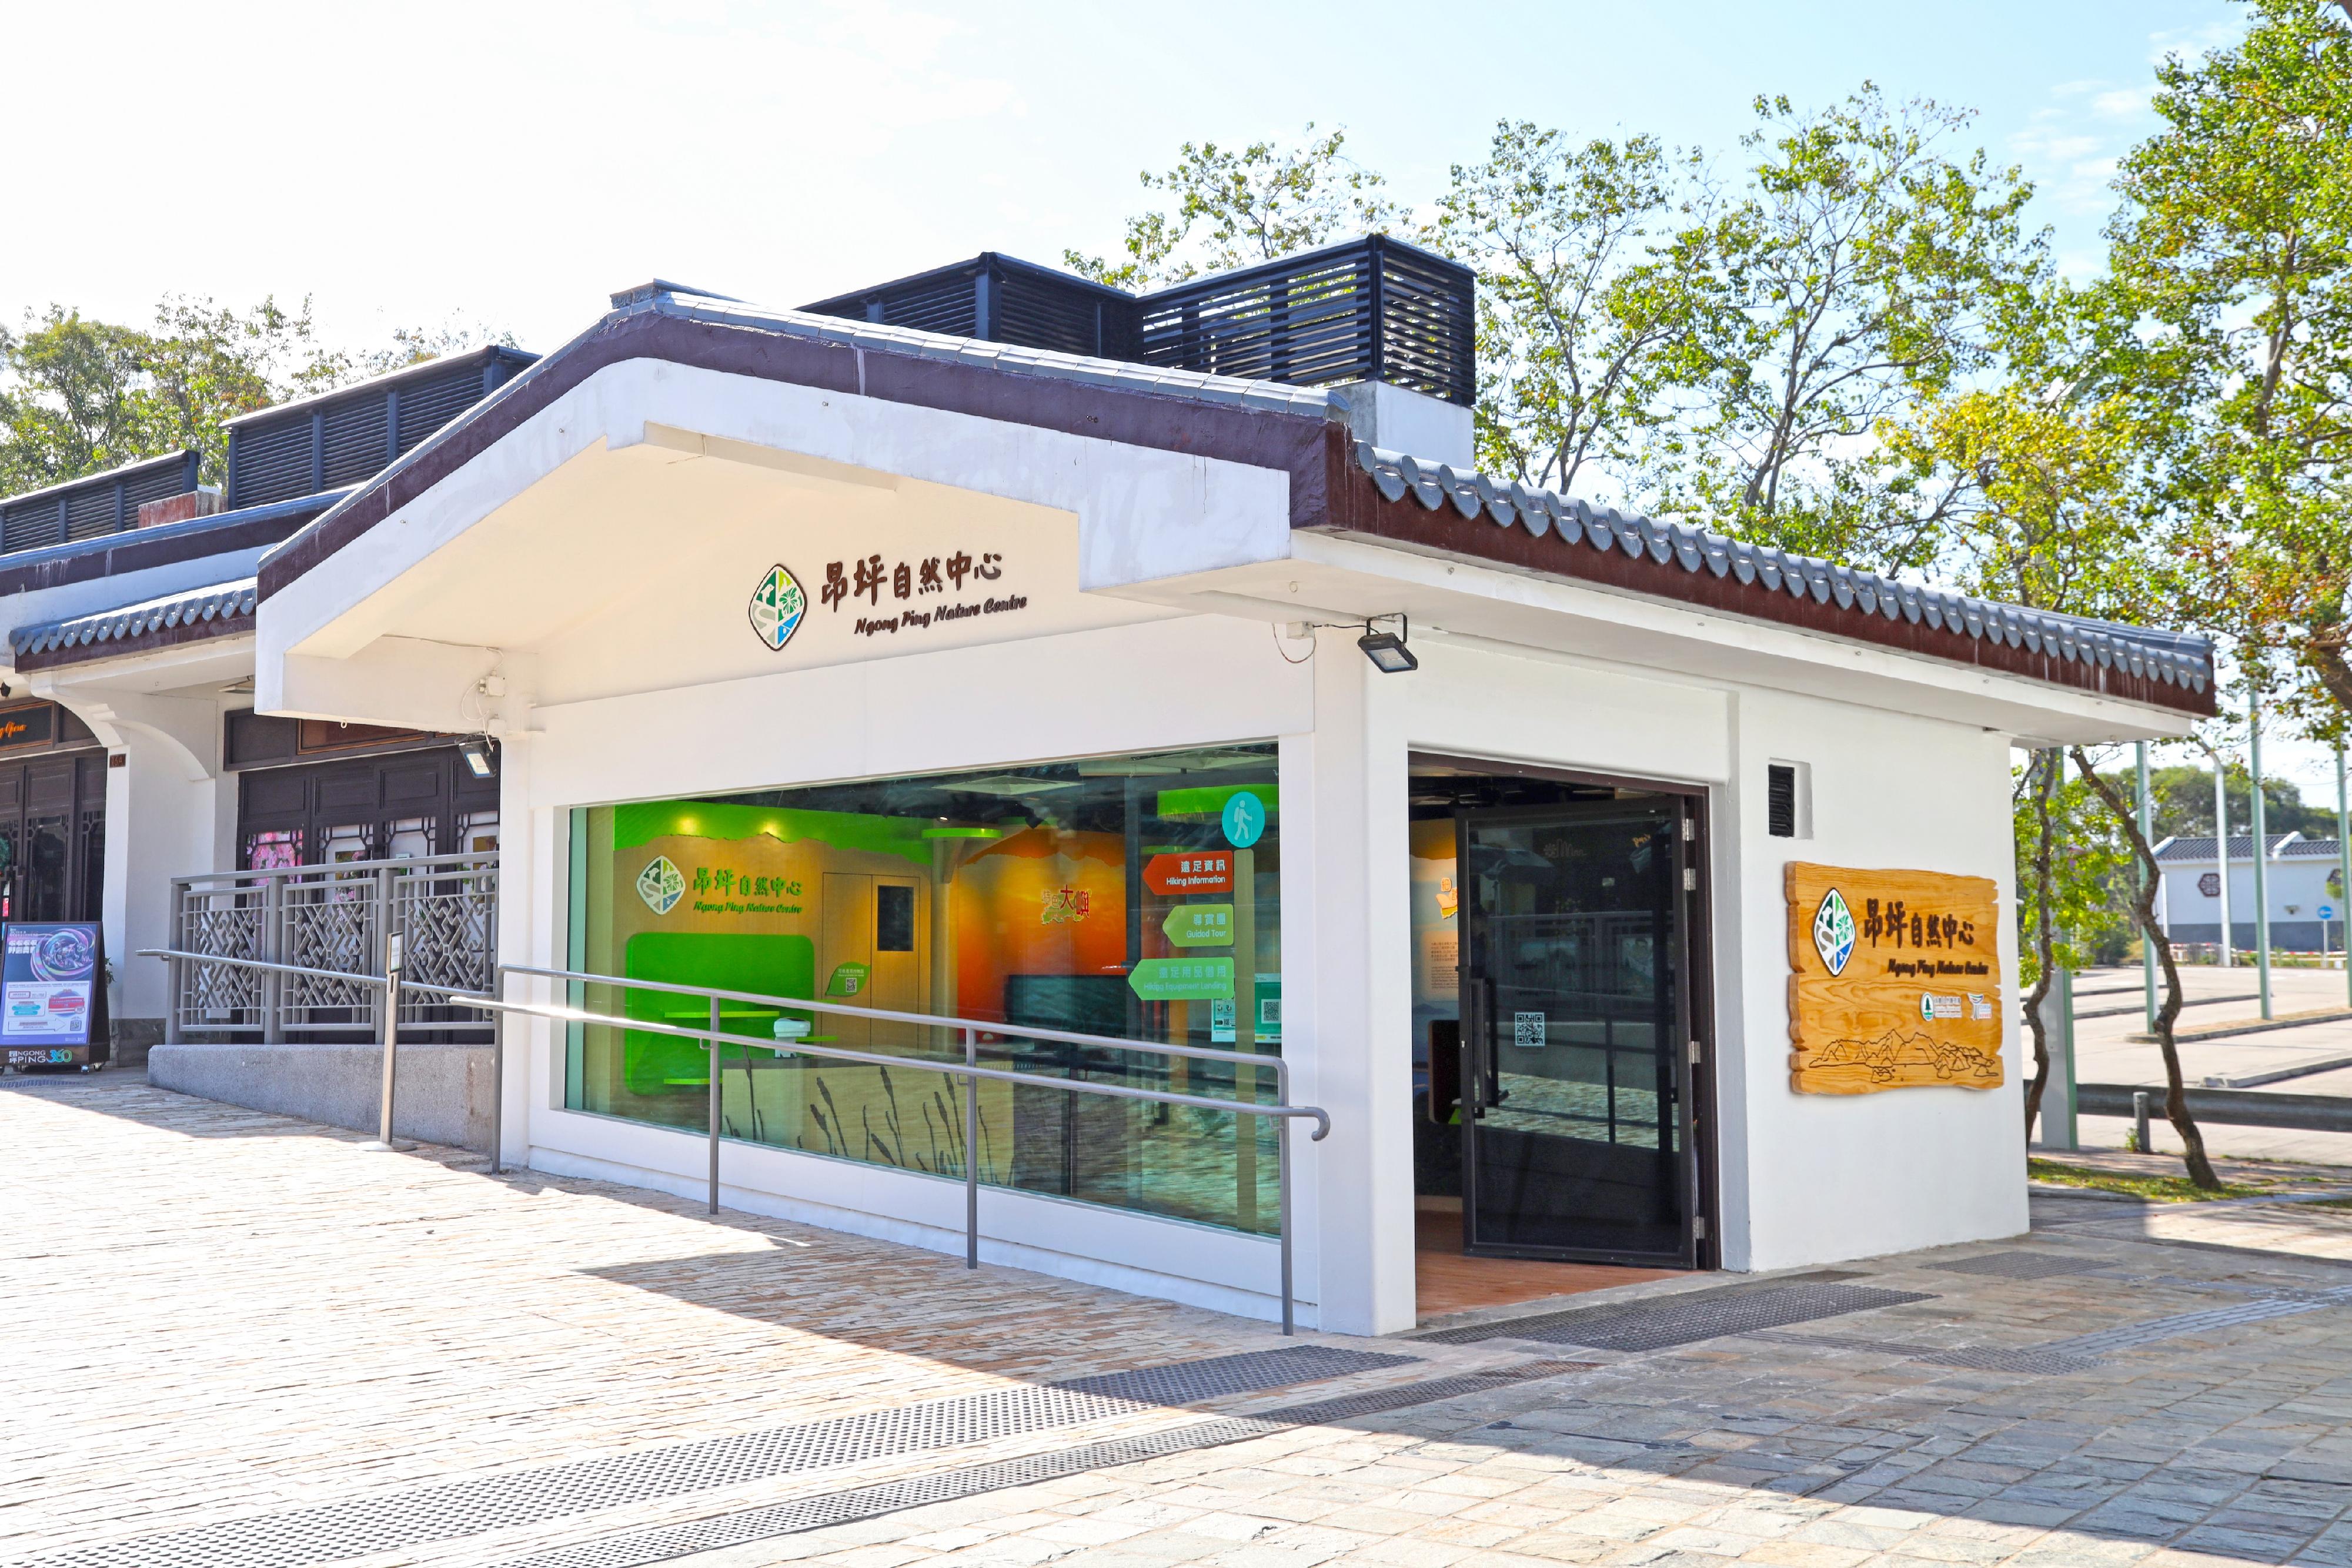 With the completion of renovation works, the Ngong Ping Nature Centre at Ngong Ping Village on Lantau Island reopened today (November 30). Adopting an open design, the renovated Centre showcases its scenic feature wall and puts up a brand new look.